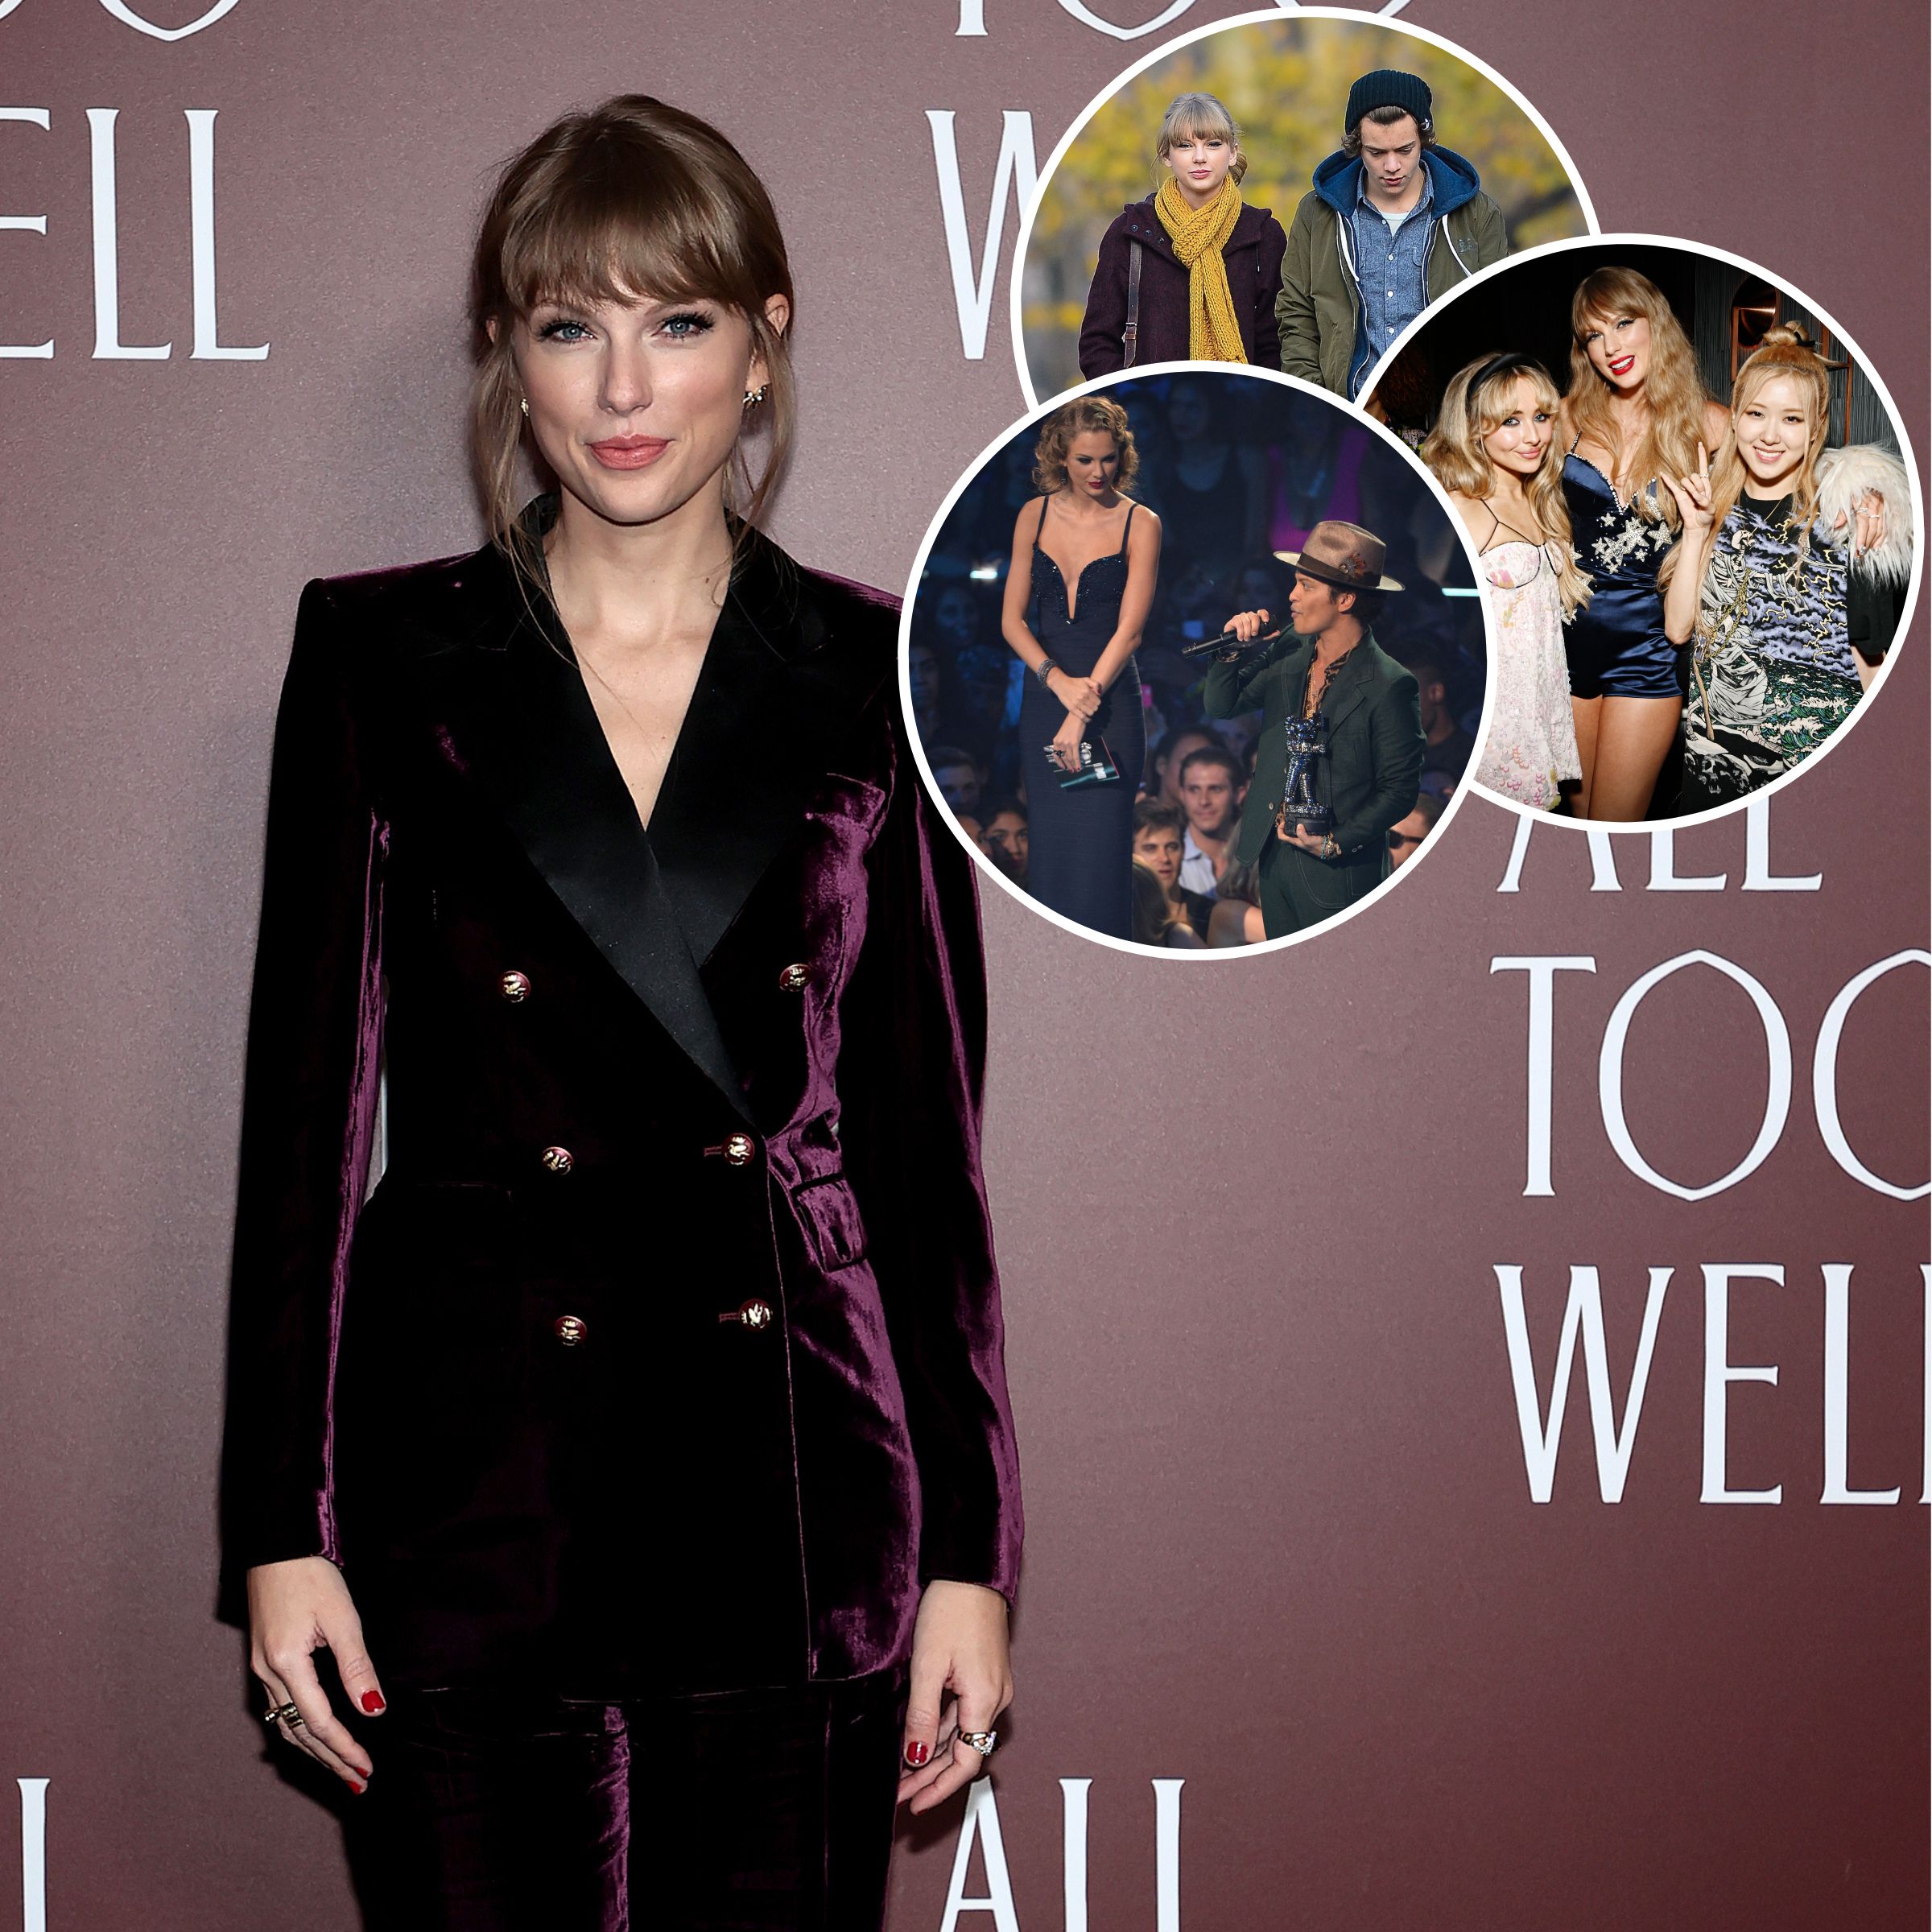 Photos of Taylor Swift Towering Over Celebrities: See Them All